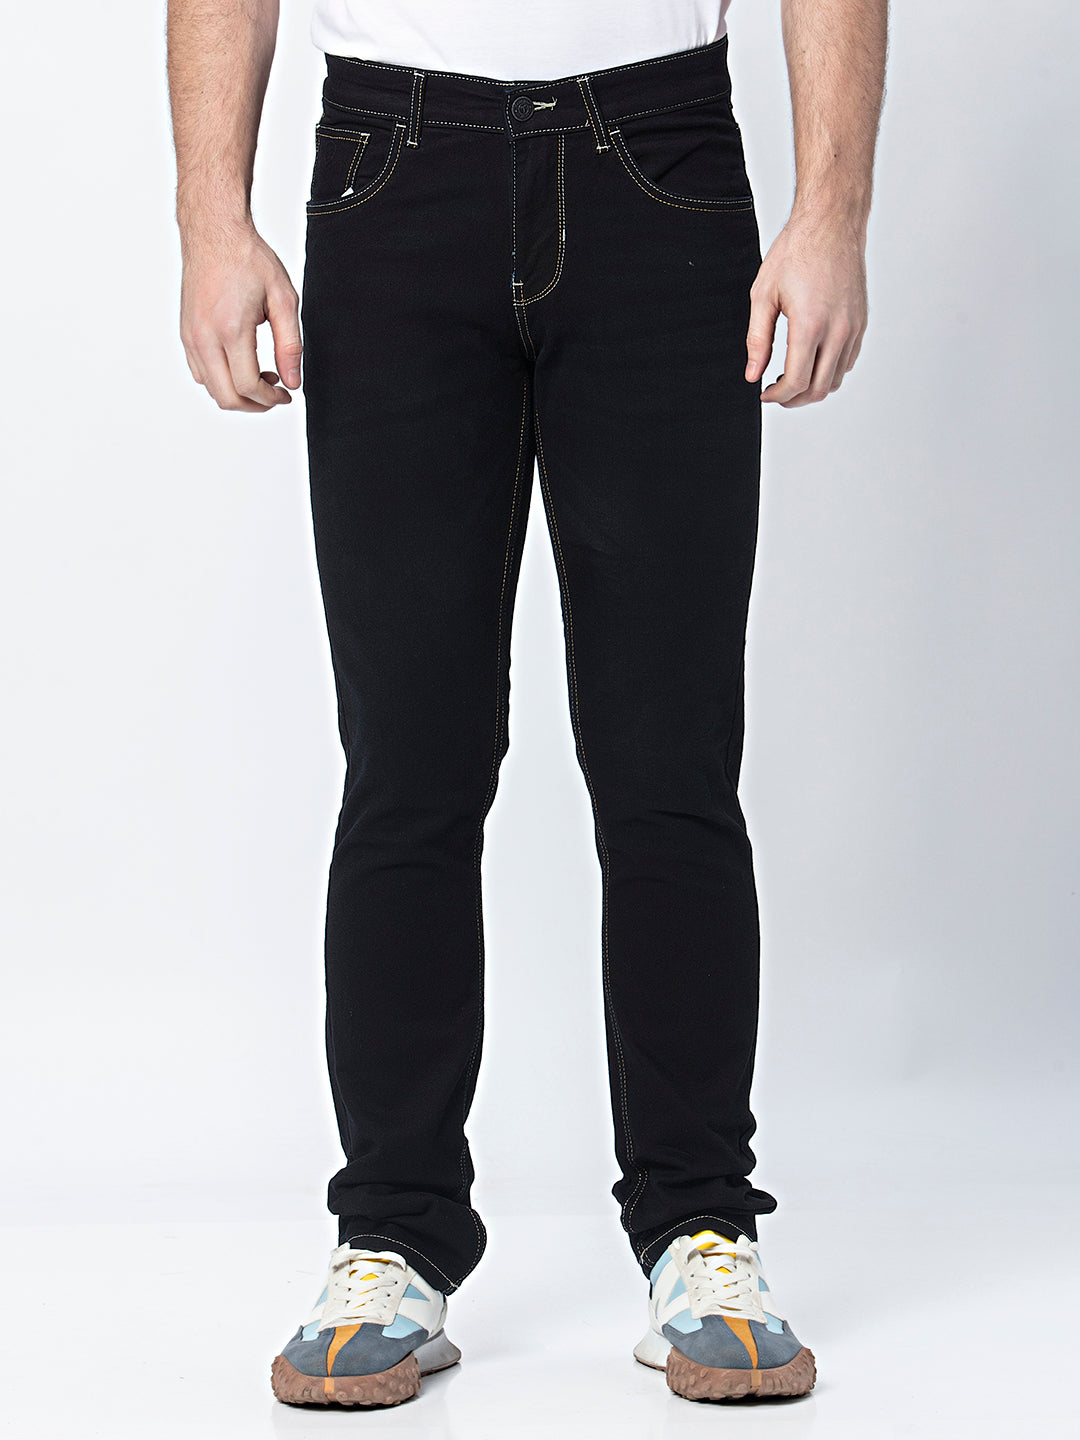 Indigo Classic: Relaxed Fit Denim Jeans